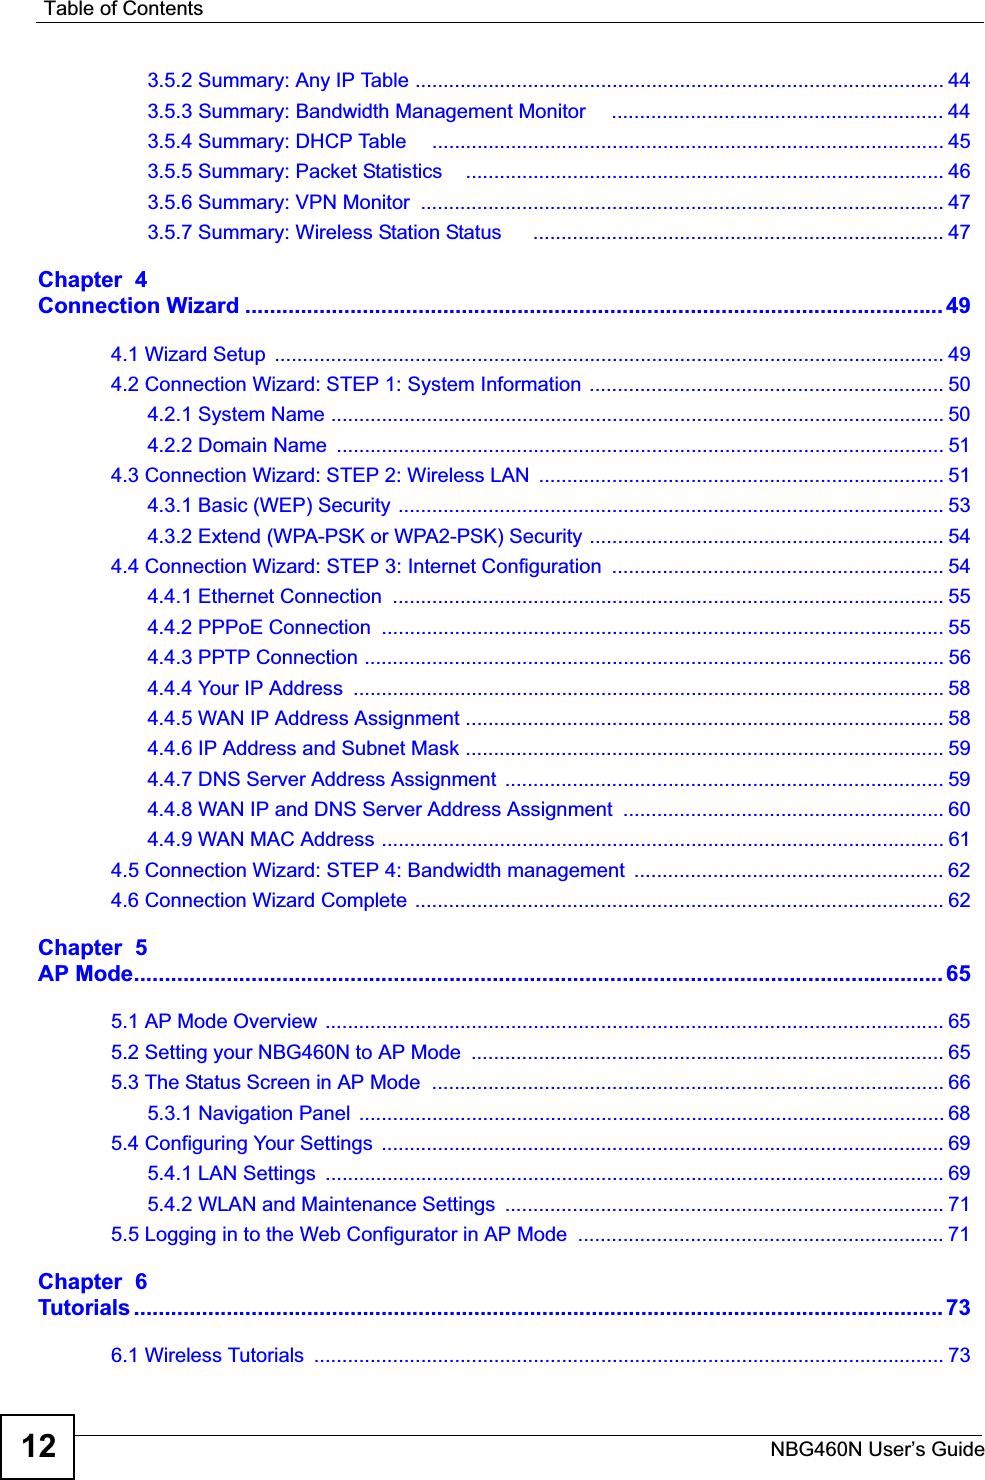 Table of ContentsNBG460N User’s Guide123.5.2 Summary: Any IP Table .............................................................................................. 443.5.3 Summary: Bandwidth Management Monitor     ........................................................... 443.5.4 Summary: DHCP Table     ........................................................................................... 453.5.5 Summary: Packet Statistics    ..................................................................................... 463.5.6 Summary: VPN Monitor  ............................................................................................. 473.5.7 Summary: Wireless Station Status      ......................................................................... 47Chapter  4Connection Wizard ................................................................................................................. 494.1 Wizard Setup  ....................................................................................................................... 494.2 Connection Wizard: STEP 1: System Information  ............................................................... 504.2.1 System Name ............................................................................................................. 504.2.2 Domain Name  ............................................................................................................ 514.3 Connection Wizard: STEP 2: Wireless LAN  ........................................................................ 514.3.1 Basic (WEP) Security ................................................................................................. 534.3.2 Extend (WPA-PSK or WPA2-PSK) Security ............................................................... 544.4 Connection Wizard: STEP 3: Internet Configuration  ........................................................... 544.4.1 Ethernet Connection  .................................................................................................. 554.4.2 PPPoE Connection  .................................................................................................... 554.4.3 PPTP Connection ....................................................................................................... 564.4.4 Your IP Address  ......................................................................................................... 584.4.5 WAN IP Address Assignment ..................................................................................... 584.4.6 IP Address and Subnet Mask ..................................................................................... 594.4.7 DNS Server Address Assignment  .............................................................................. 594.4.8 WAN IP and DNS Server Address Assignment  ......................................................... 604.4.9 WAN MAC Address .................................................................................................... 614.5 Connection Wizard: STEP 4: Bandwidth management  ....................................................... 624.6 Connection Wizard Complete .............................................................................................. 62Chapter  5AP Mode................................................................................................................................... 655.1 AP Mode Overview  .............................................................................................................. 655.2 Setting your NBG460N to AP Mode  .................................................................................... 655.3 The Status Screen in AP Mode  ........................................................................................... 665.3.1 Navigation Panel  ........................................................................................................ 685.4 Configuring Your Settings  .................................................................................................... 695.4.1 LAN Settings  .............................................................................................................. 695.4.2 WLAN and Maintenance Settings  .............................................................................. 715.5 Logging in to the Web Configurator in AP Mode  ................................................................. 71Chapter  6Tutorials ................................................................................................................................... 736.1 Wireless Tutorials  ................................................................................................................ 73